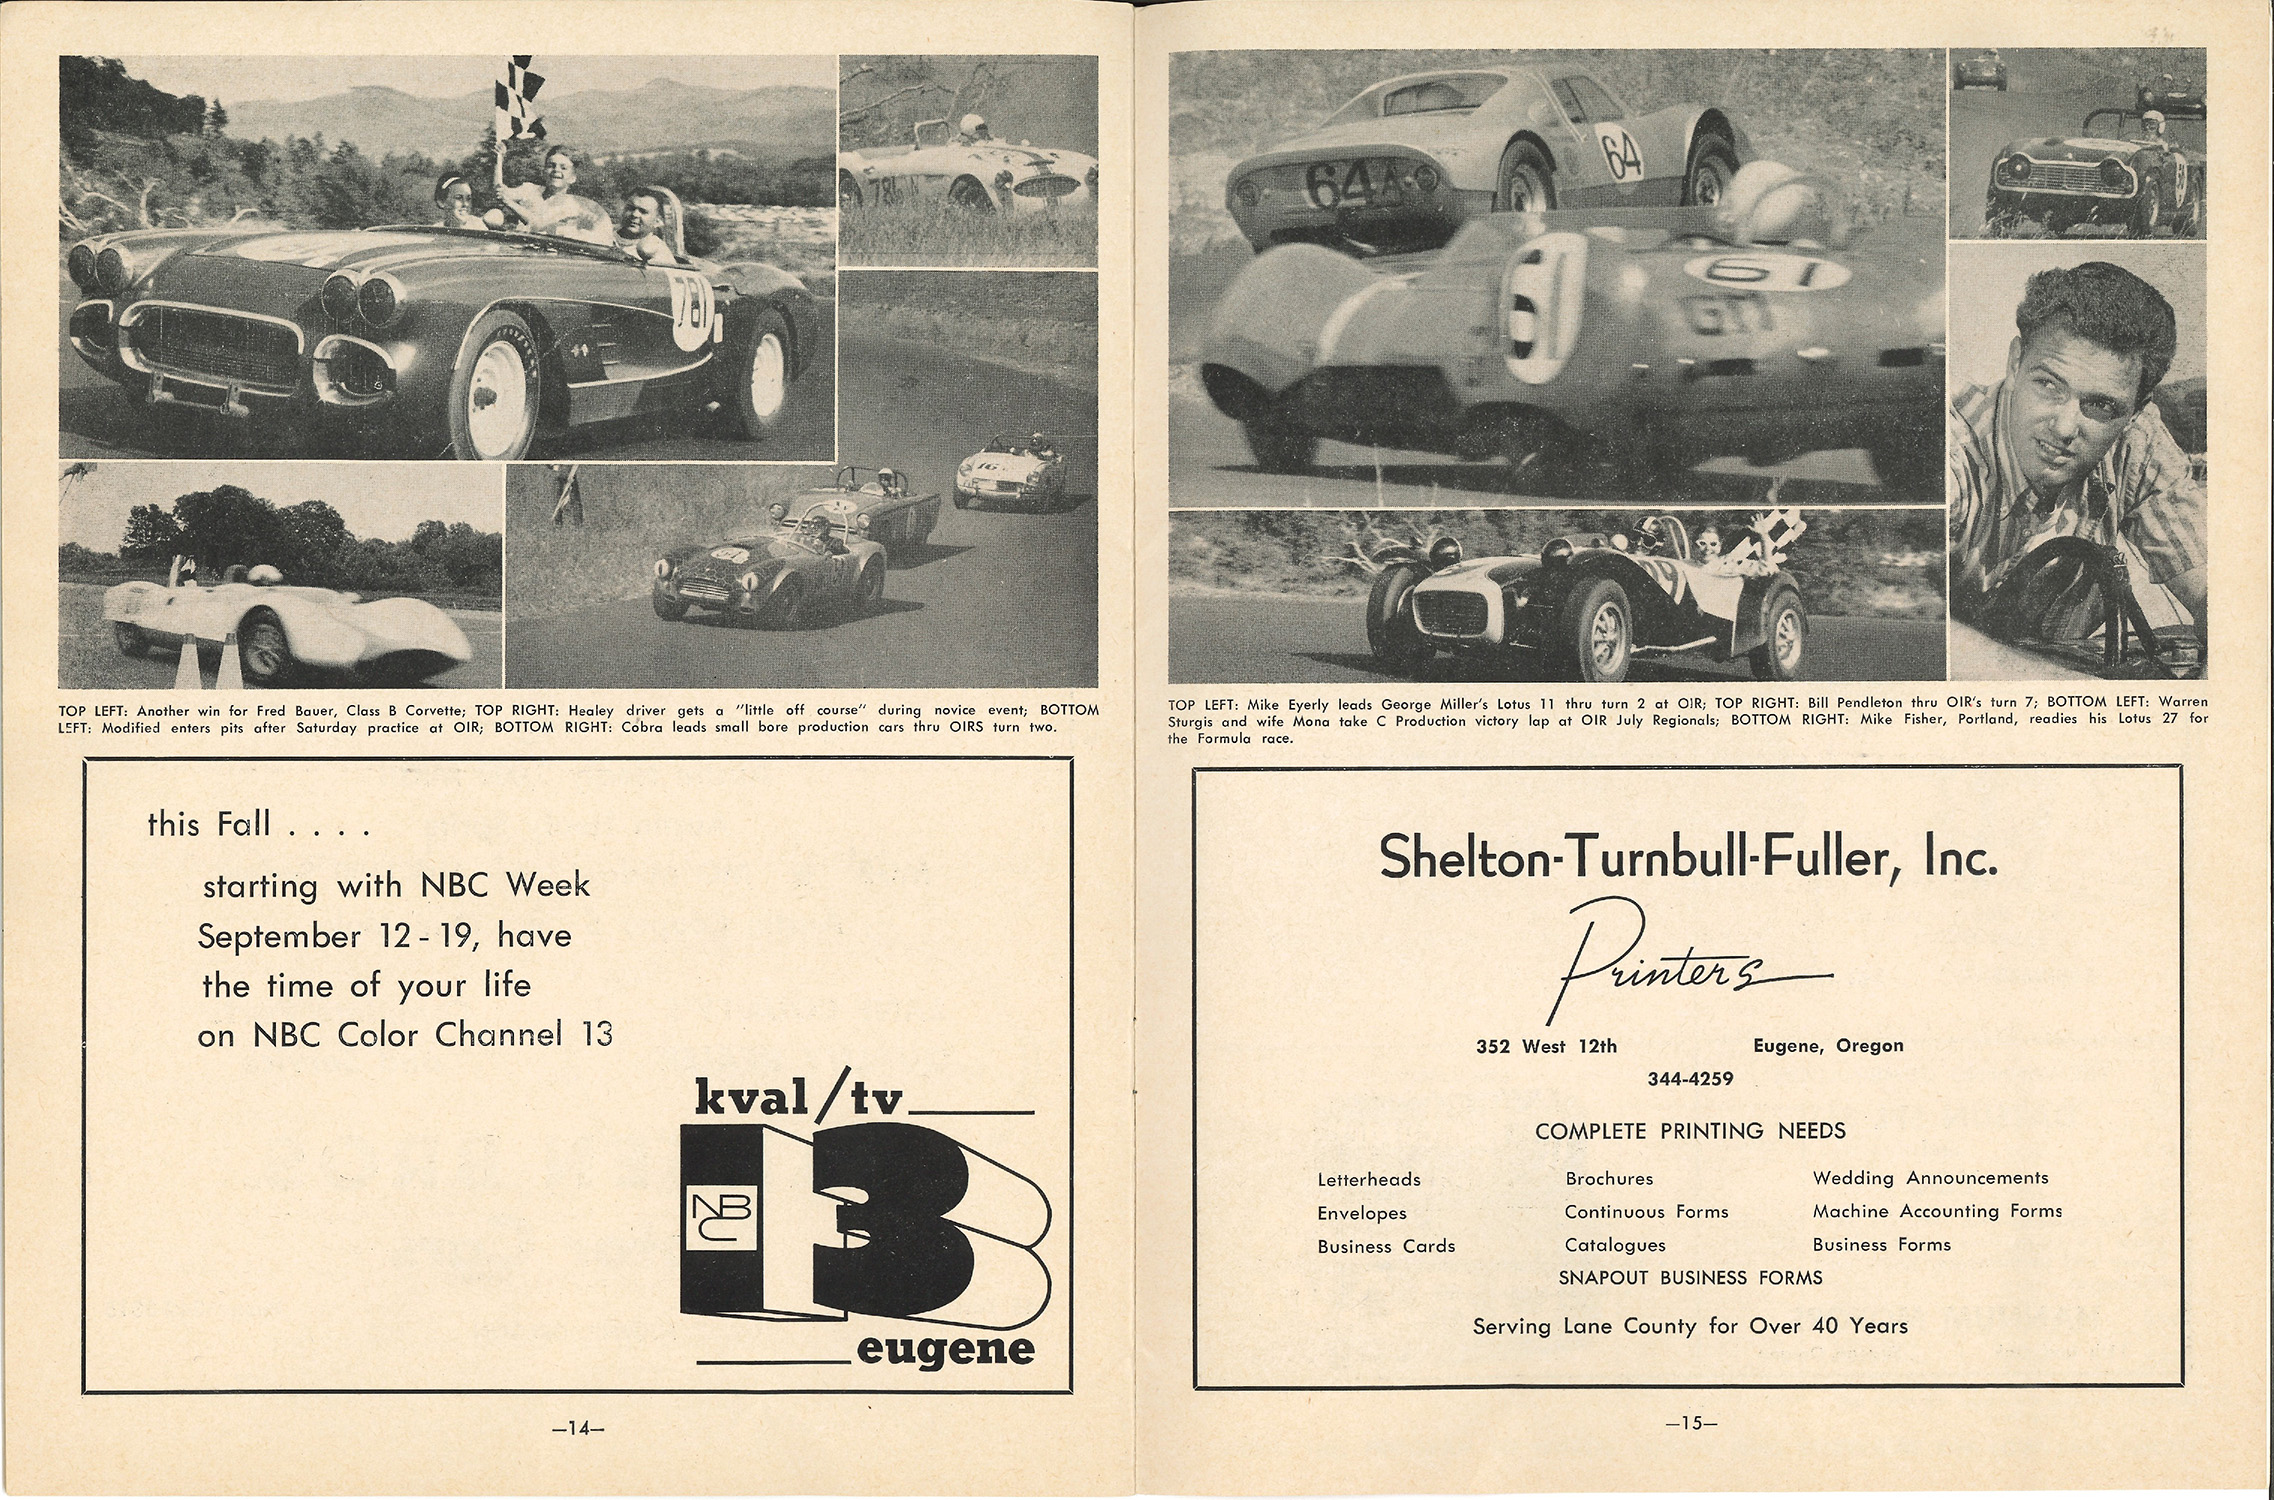 OIR Pamphlet August 1965 with 1965 Race Entry List_Page_09-LR